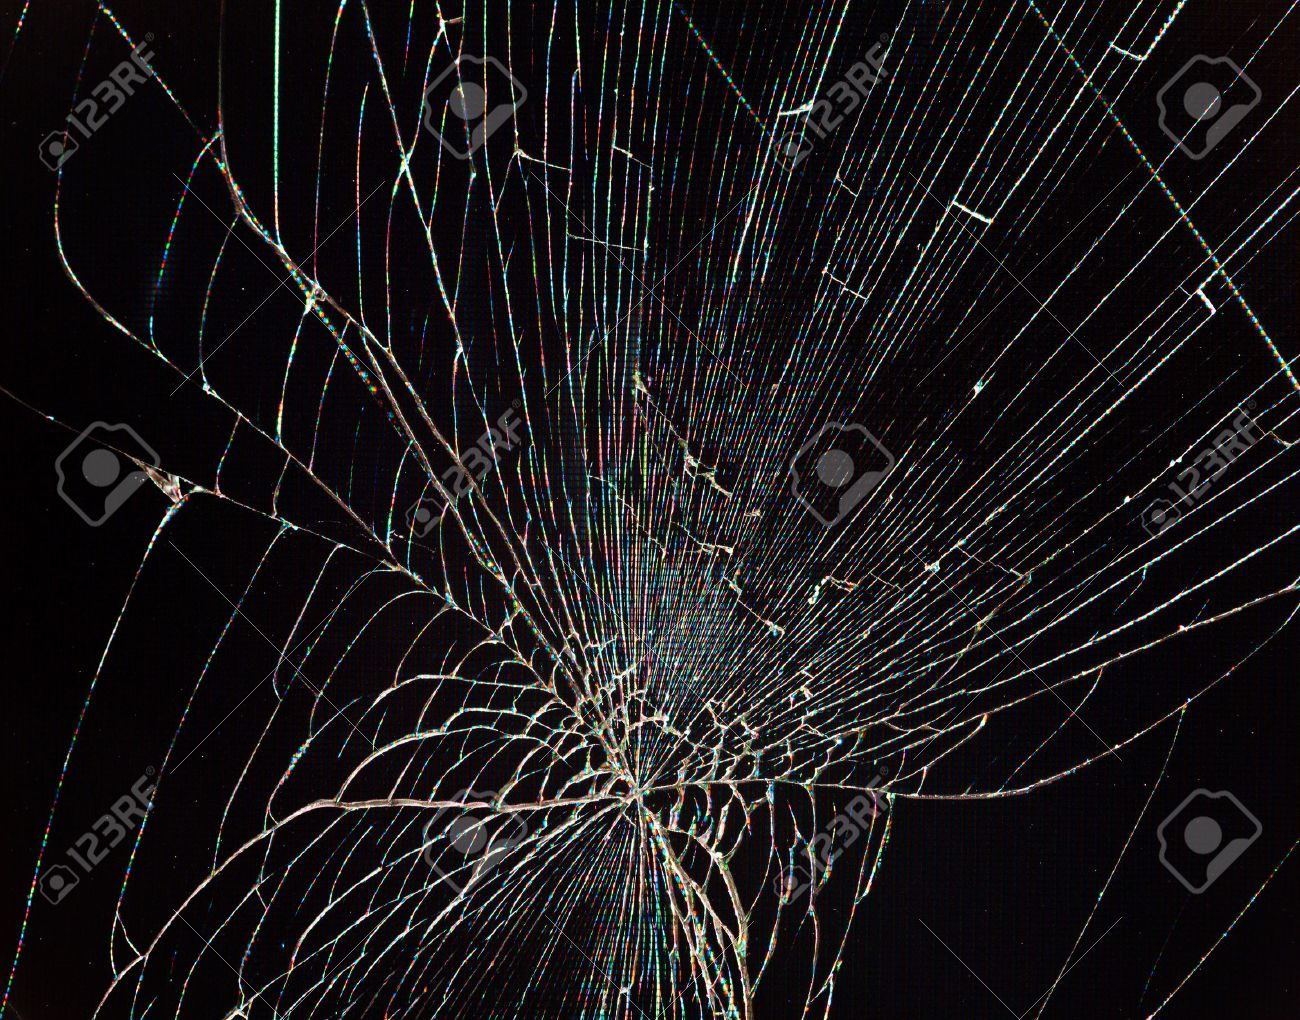 a cracked screen wallpaper Archives - iPhone Support